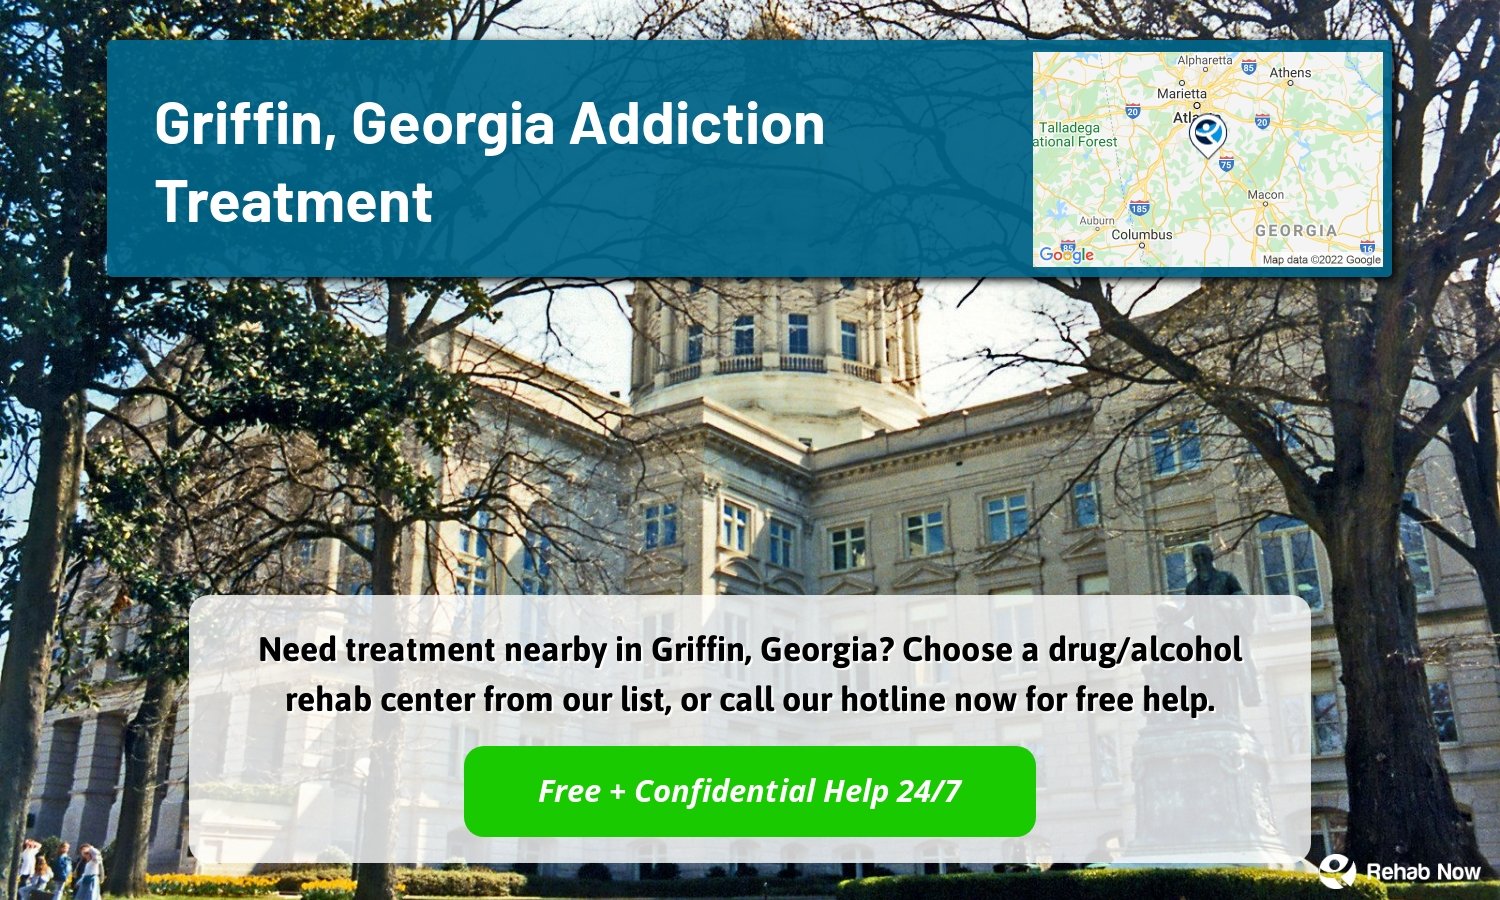 Need treatment nearby in Griffin, Georgia? Choose a drug/alcohol rehab center from our list, or call our hotline now for free help.